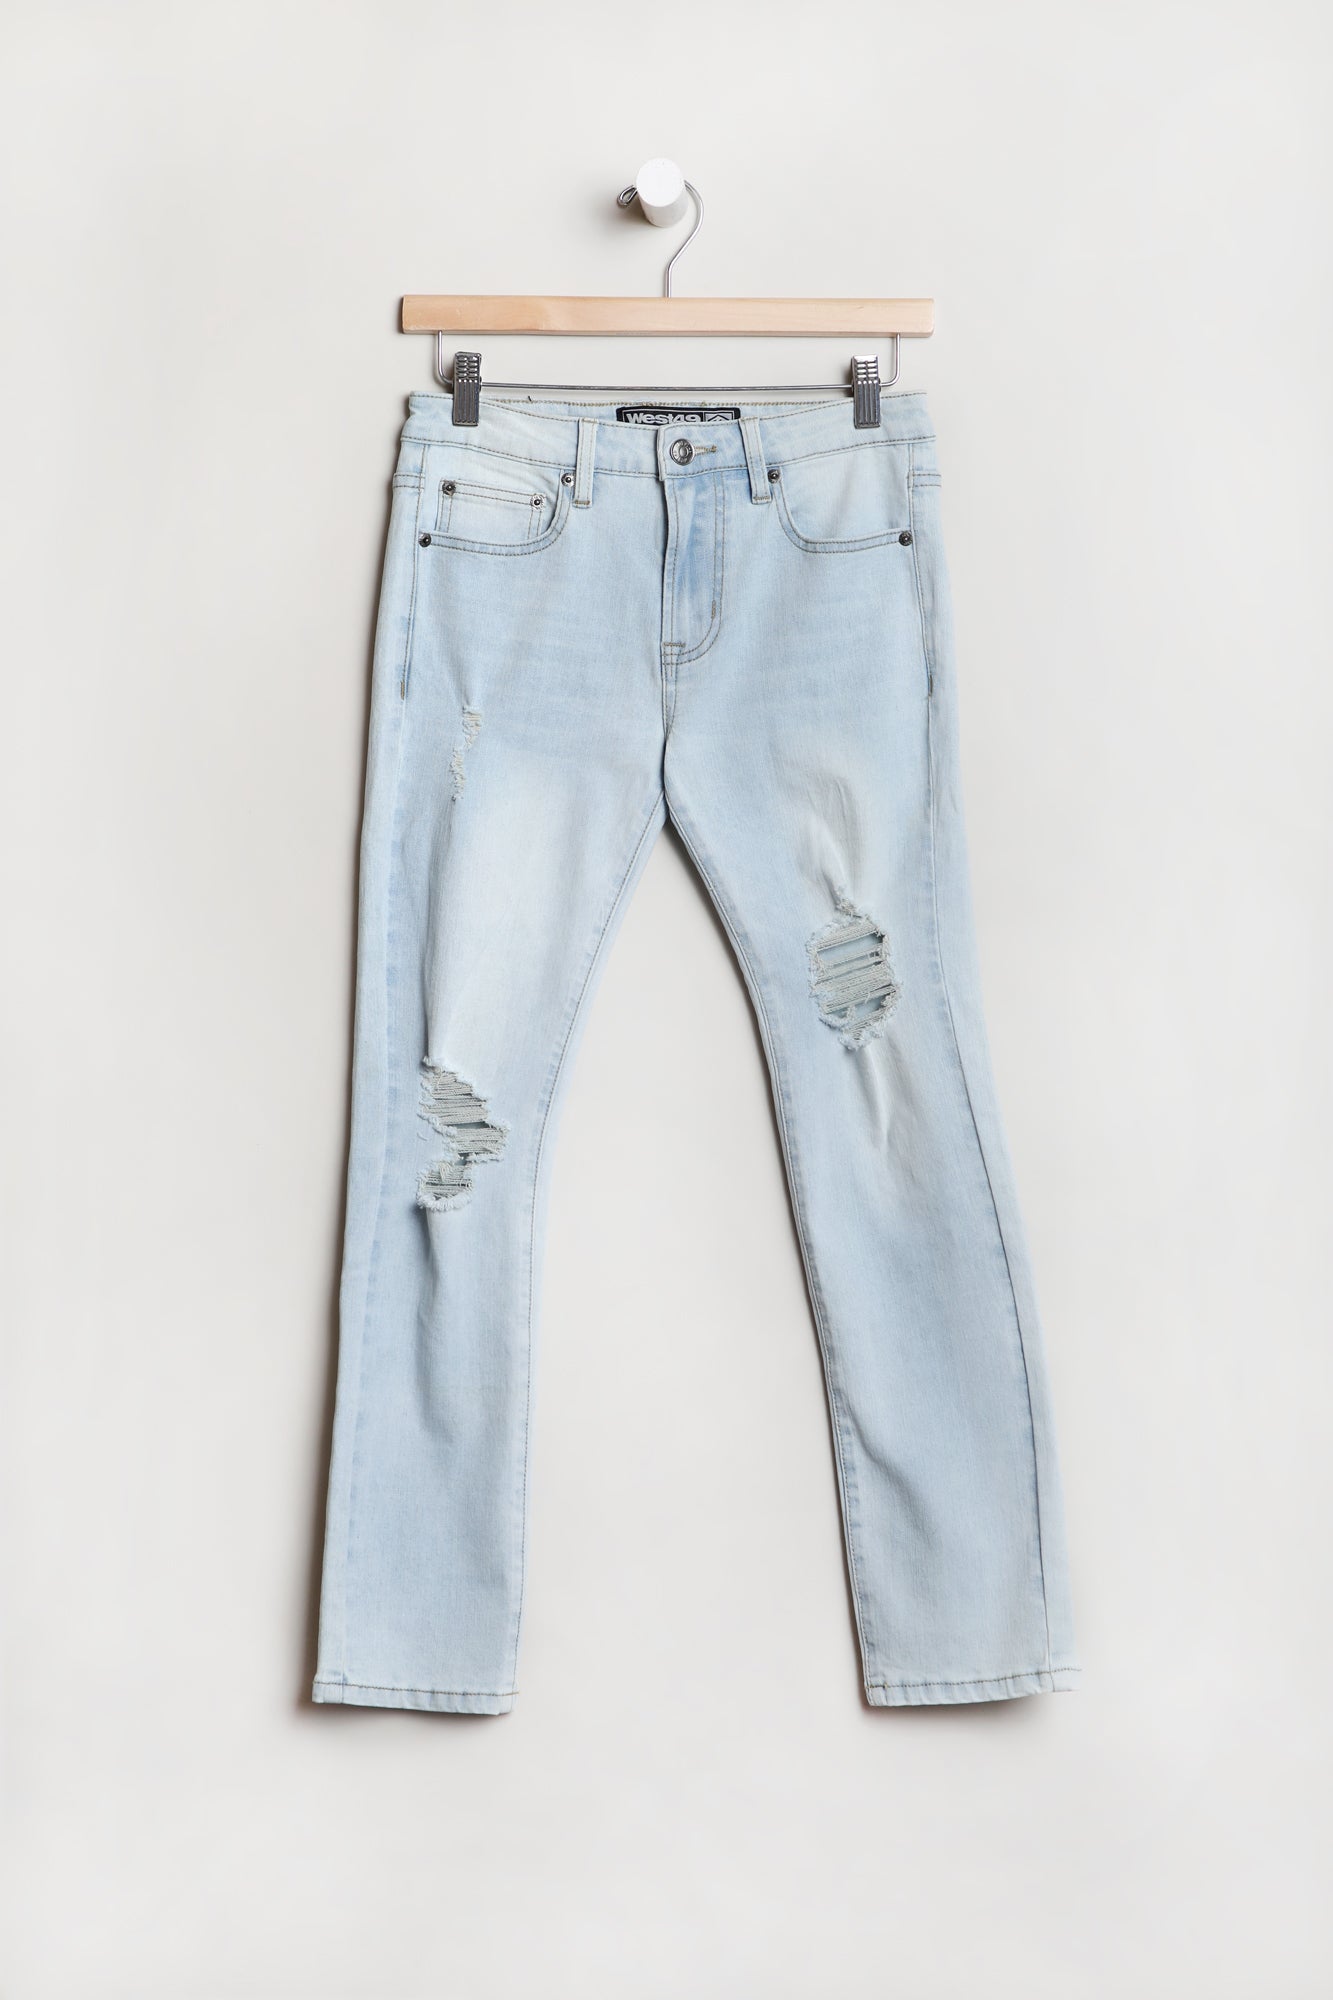 West49 Youth Distressed Skinny Jeans - Light Blue /